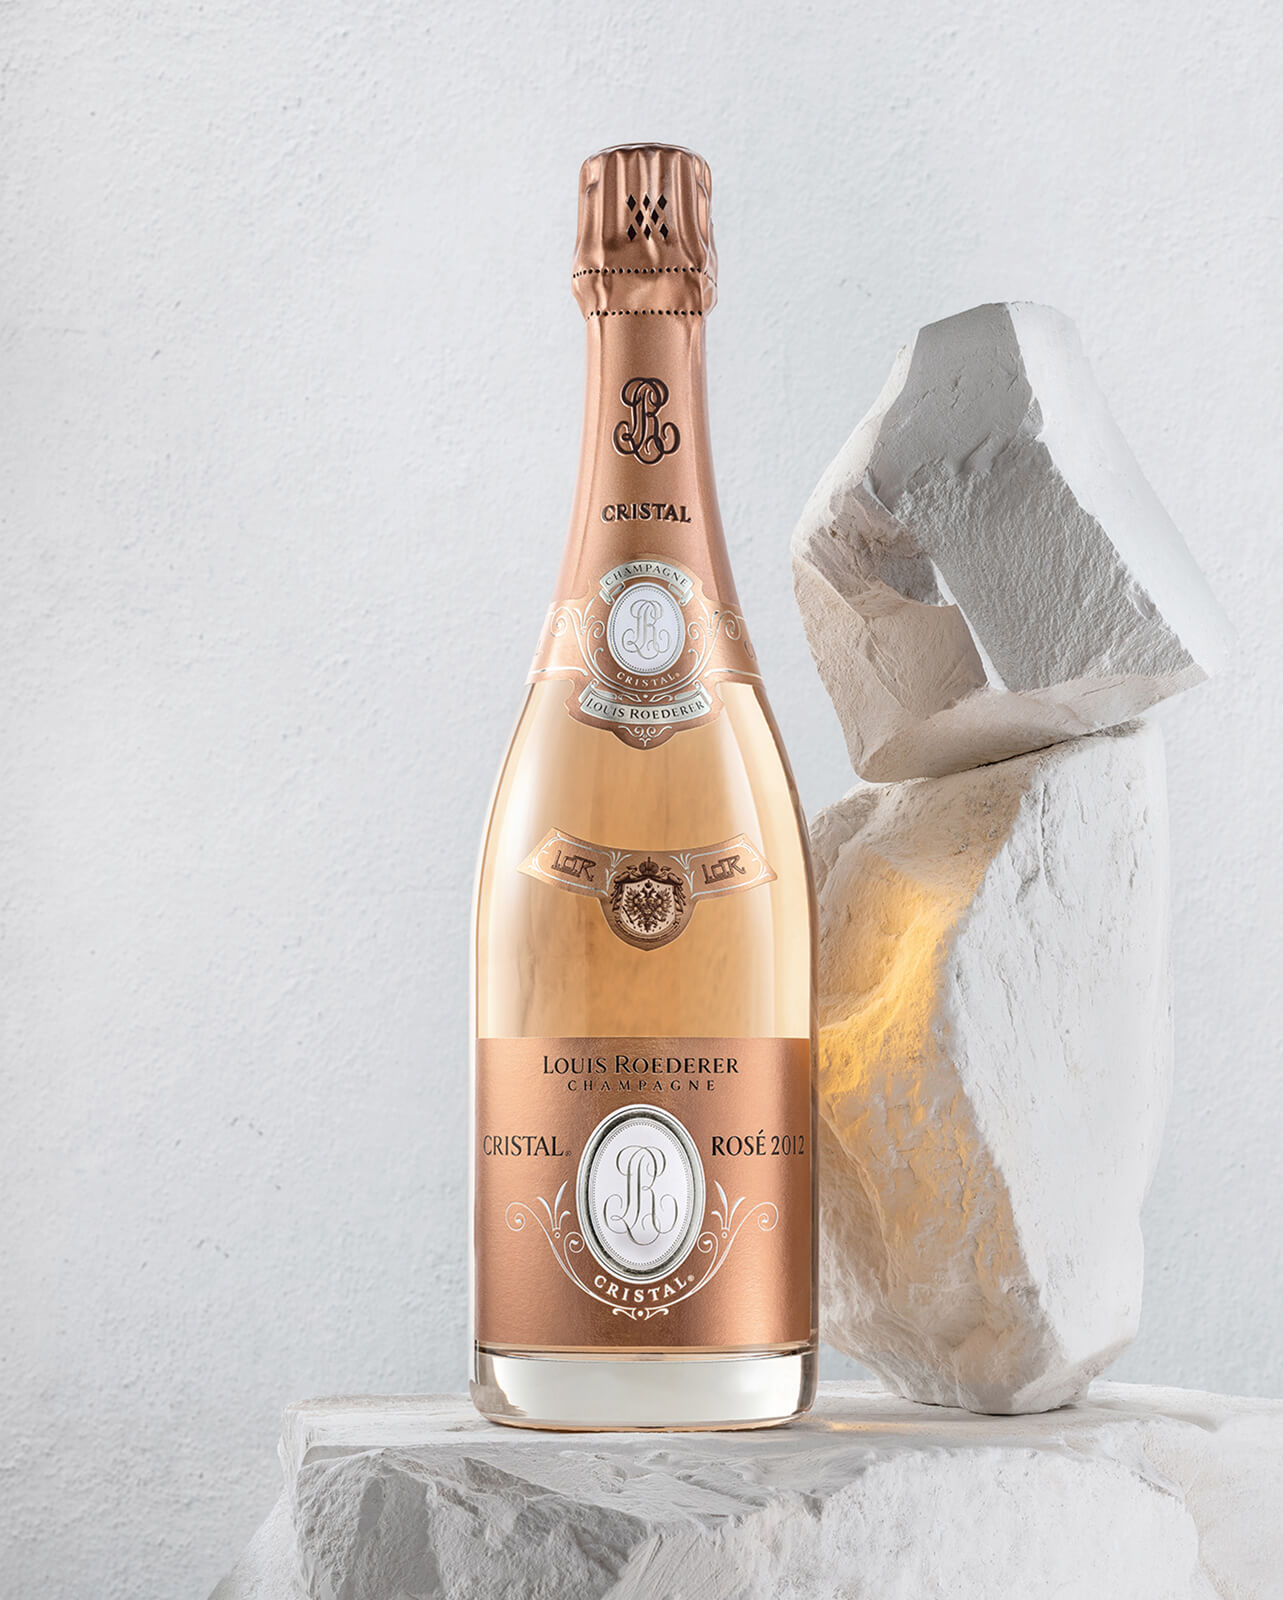 Louis Roederer Cristal 2013 And Champagne Good Cristal & - 2012: Rosé Gets As As Pad Quill